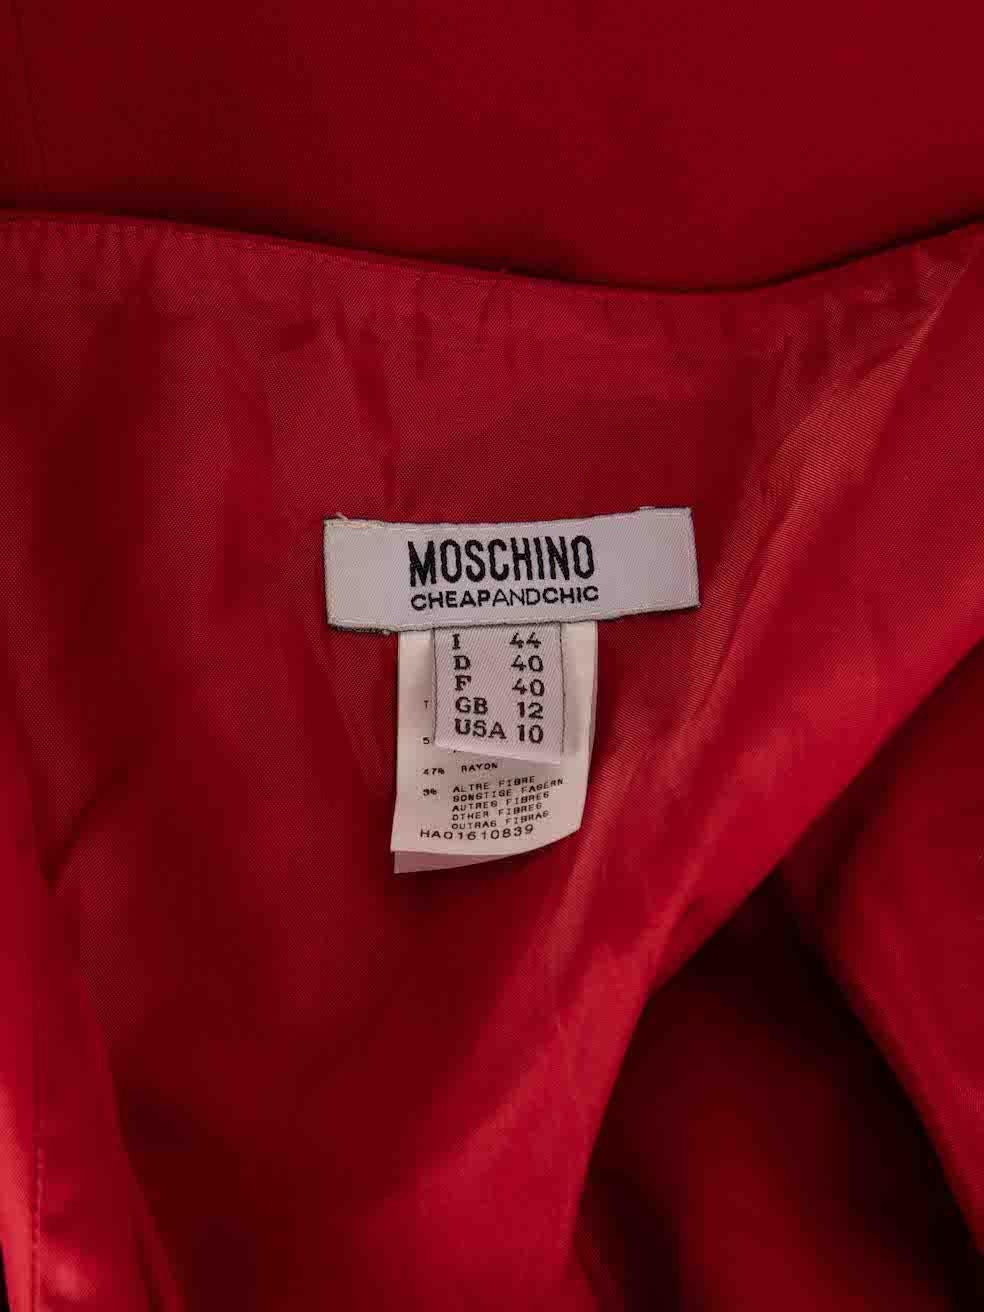 Moschino Moschino Cheap And Chic Red Flared Knee Length Skirt Size L For Sale 3